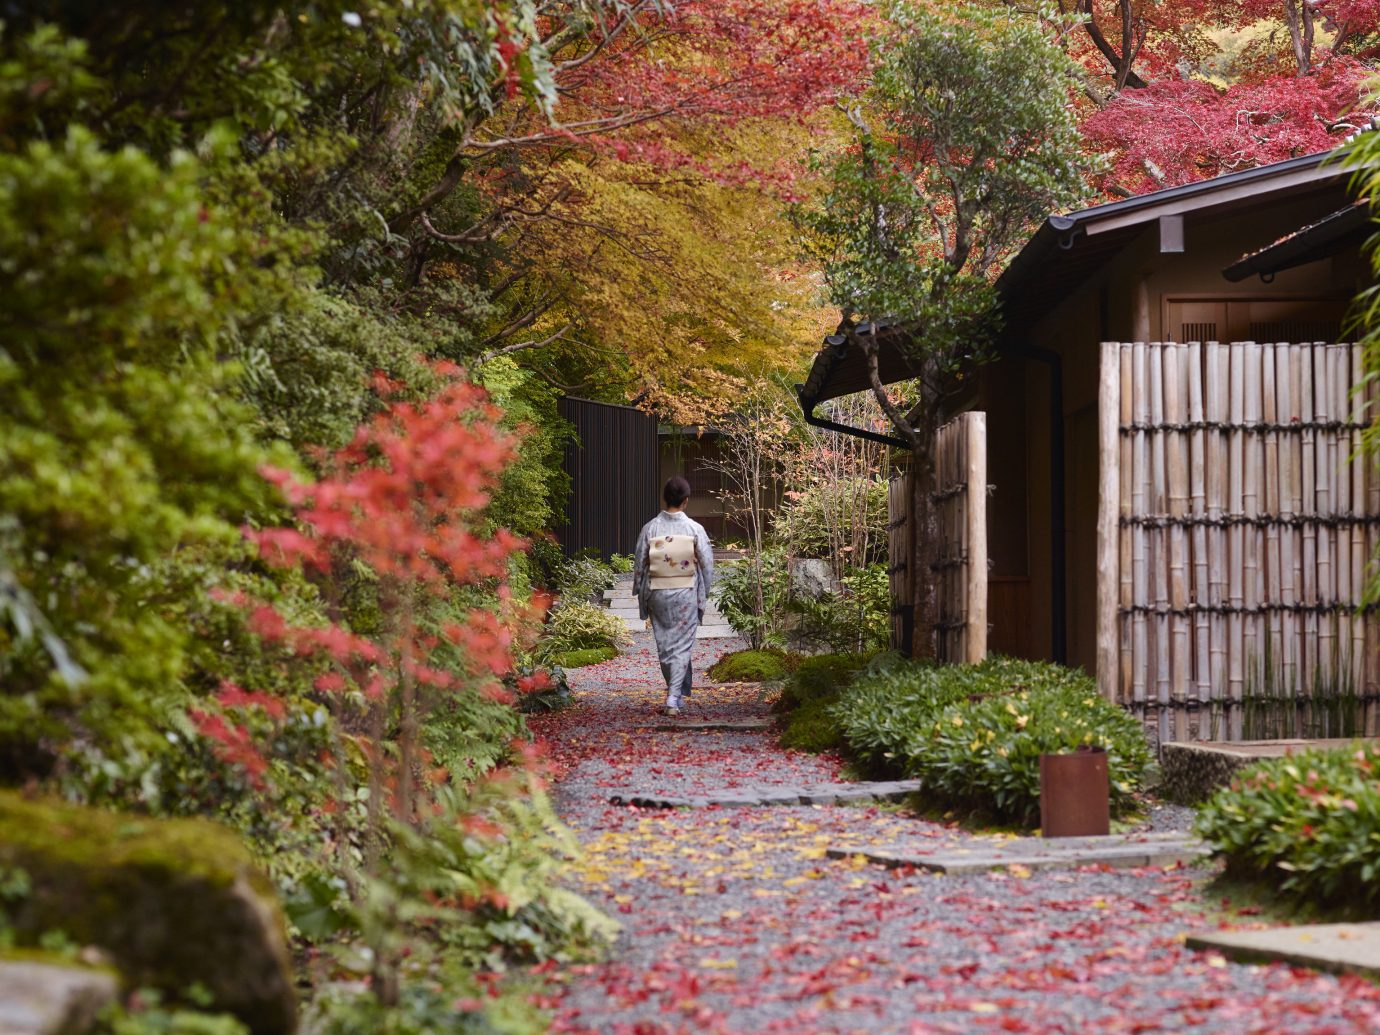 Beauty Health + Wellness Japan Kyoto San Francisco Travel Tips leaf Nature plant Garden tree autumn walkway landscape house shrub grass home yard spring landscaping maple tree backyard flower Courtyard real estate outdoor structure lawn estate